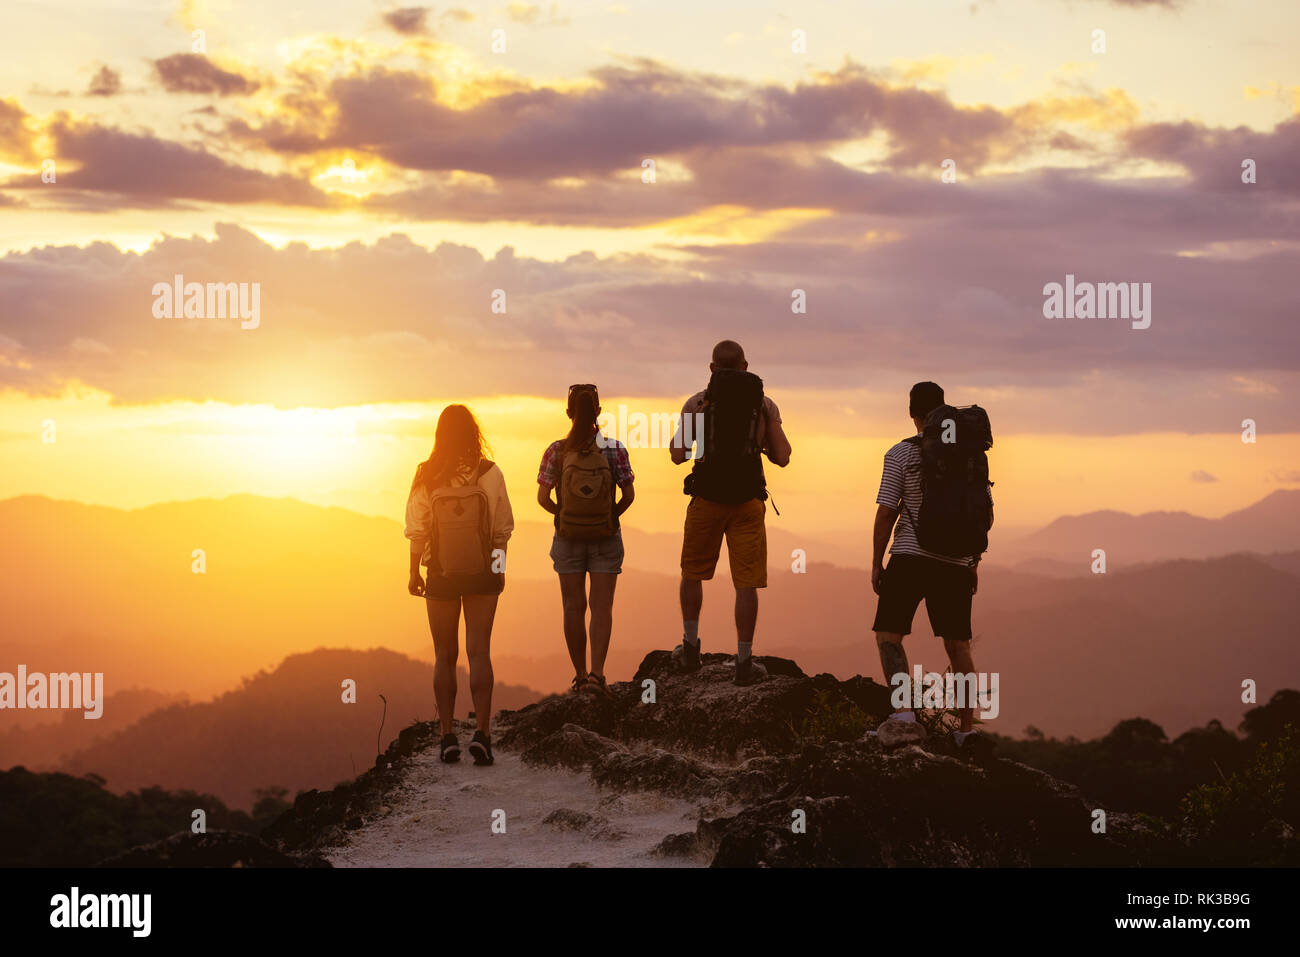 Group of four peope's silhouettes stands on mountain top and looks at sunset Stock Photo